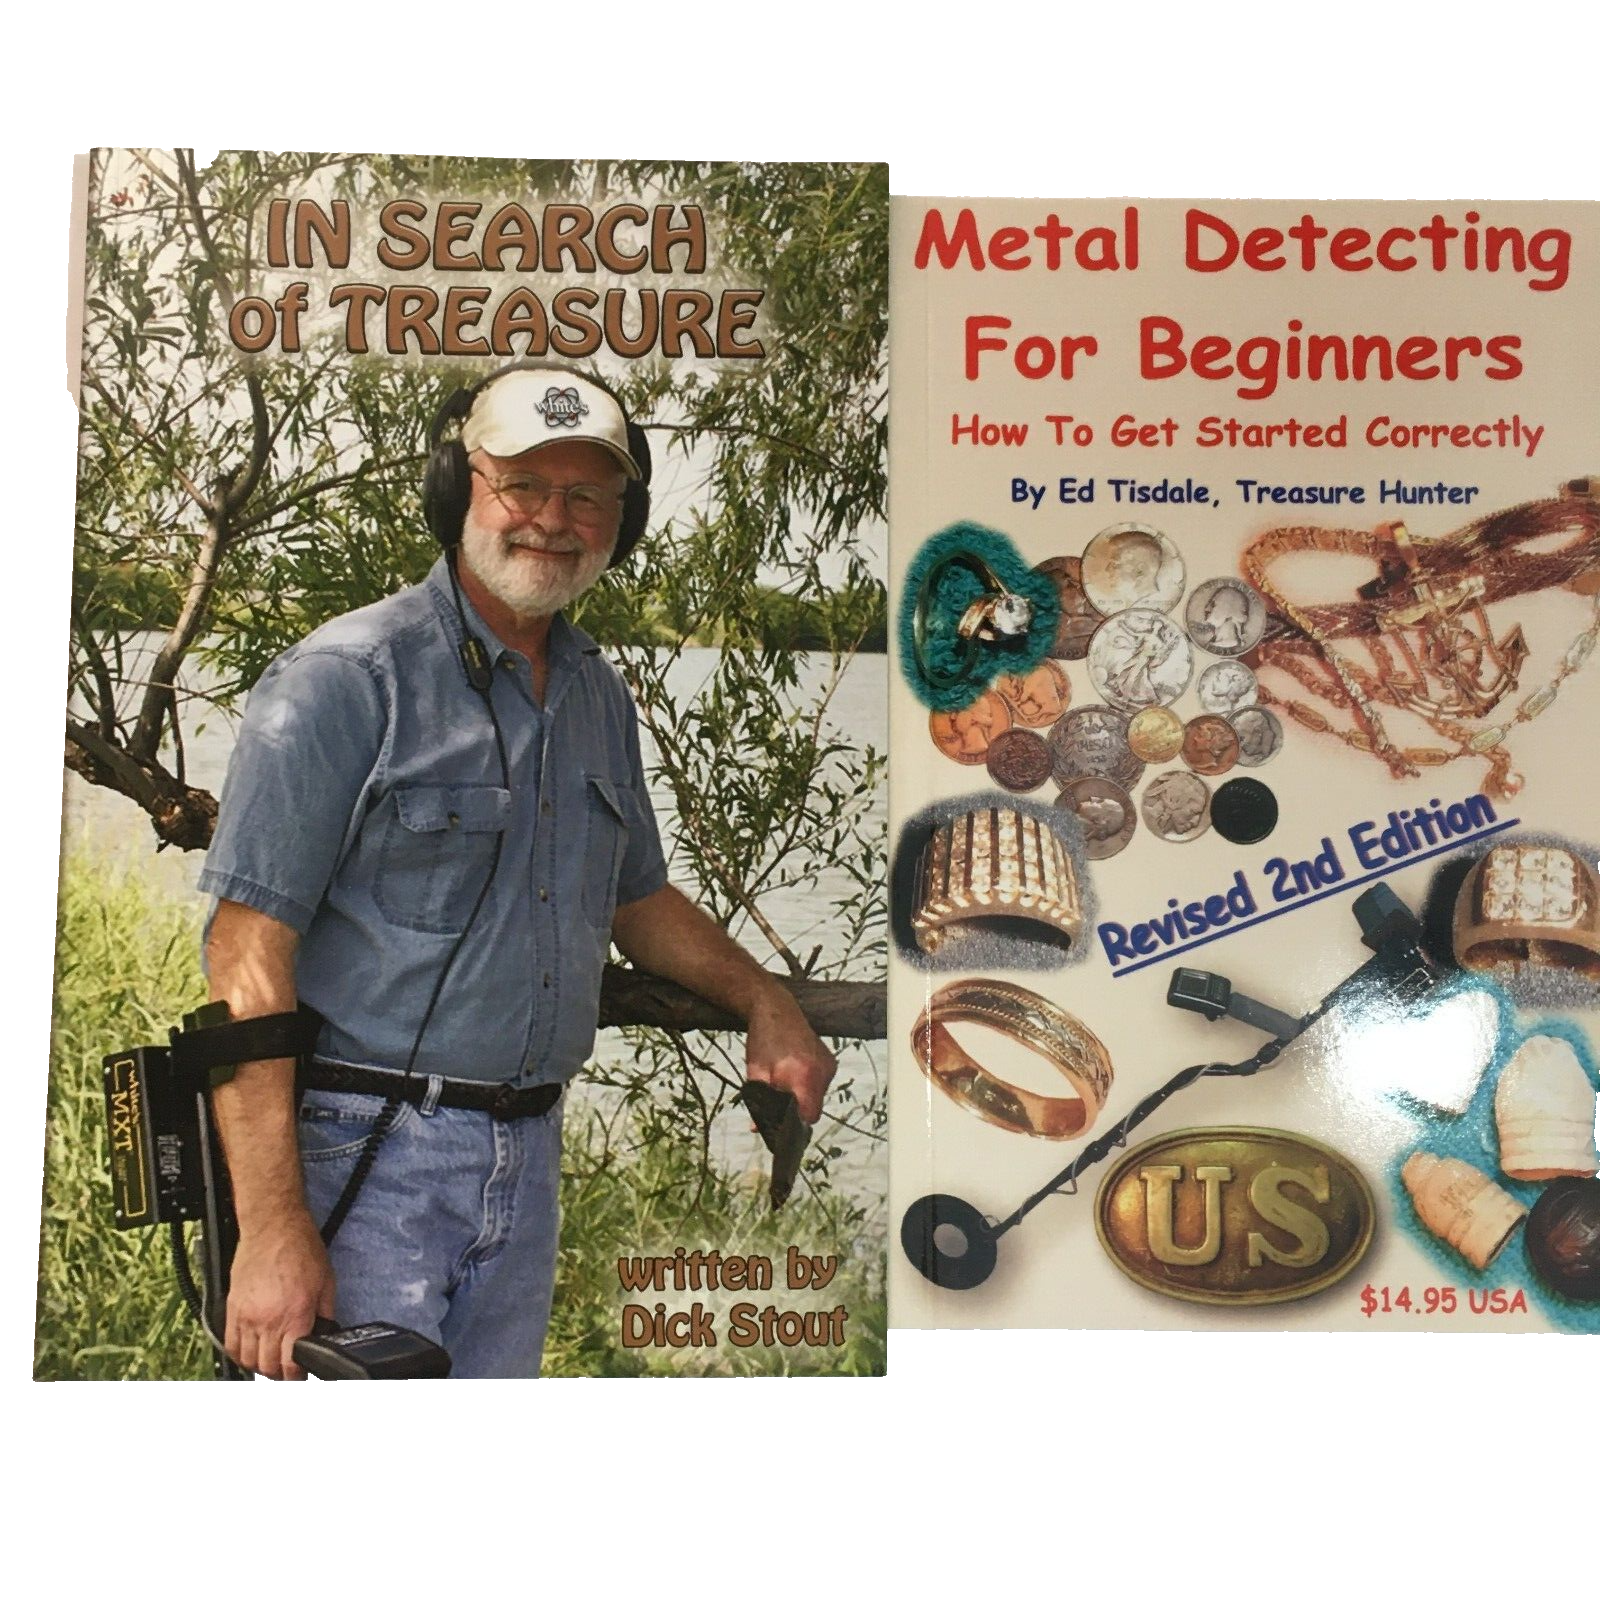 Metal Detecting for Beginners - Ed Tisdale & In Search of Treasure - Dick Stout GENERAL